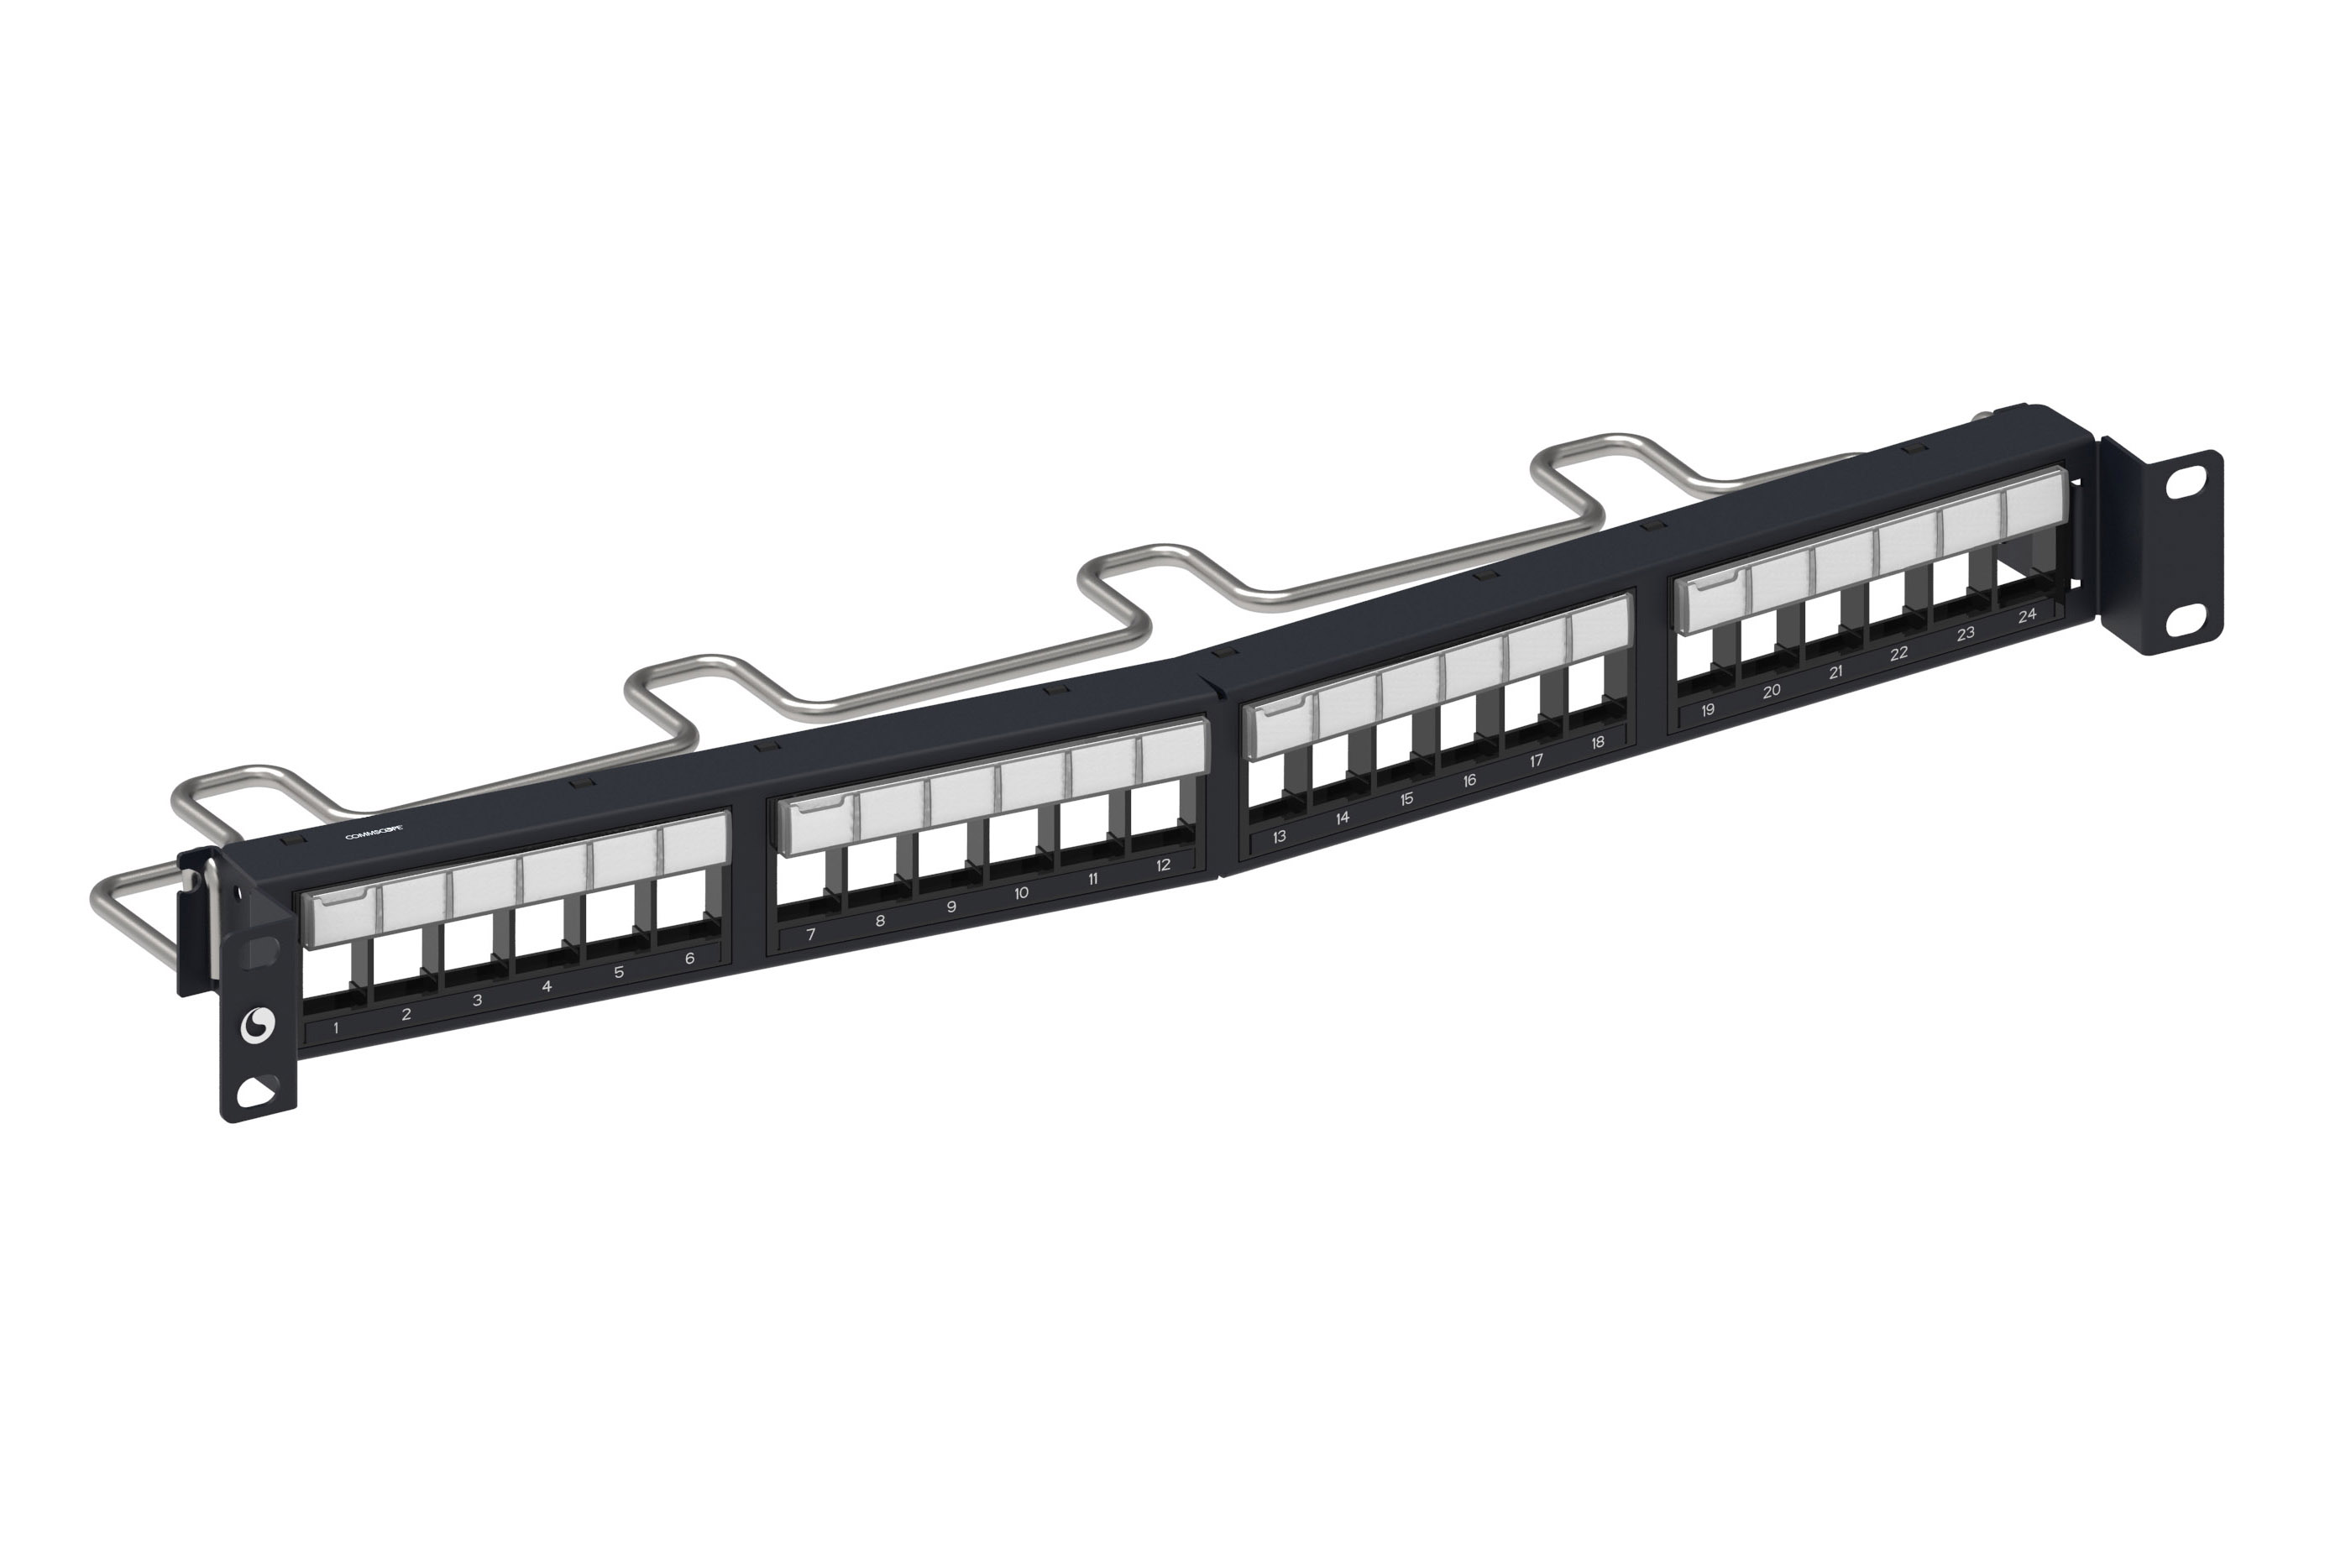 24 port STP Patch Panel, 19' - 1RU (INCLUDES rear Cable Management) - DDM Recessed Angled. UNLOADED.